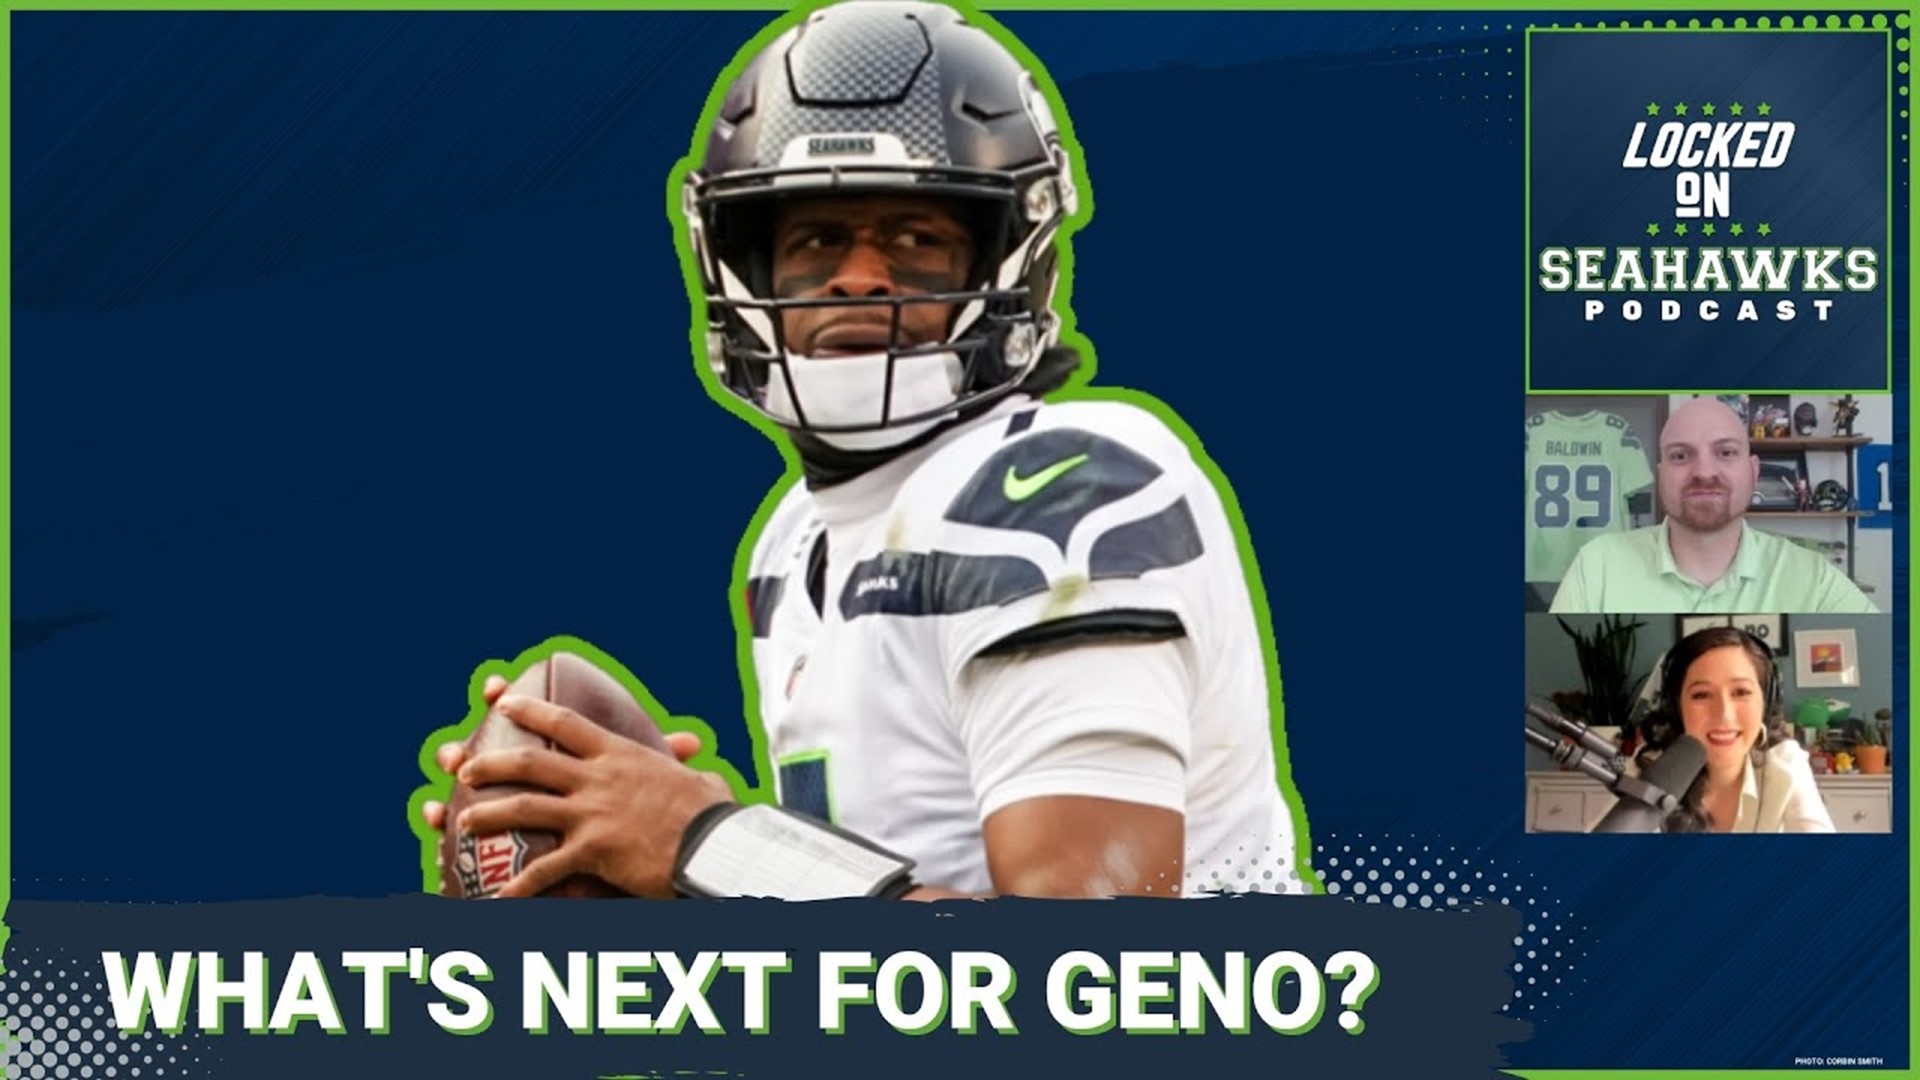 What would be an ideal step forward for Geno Smith under center?